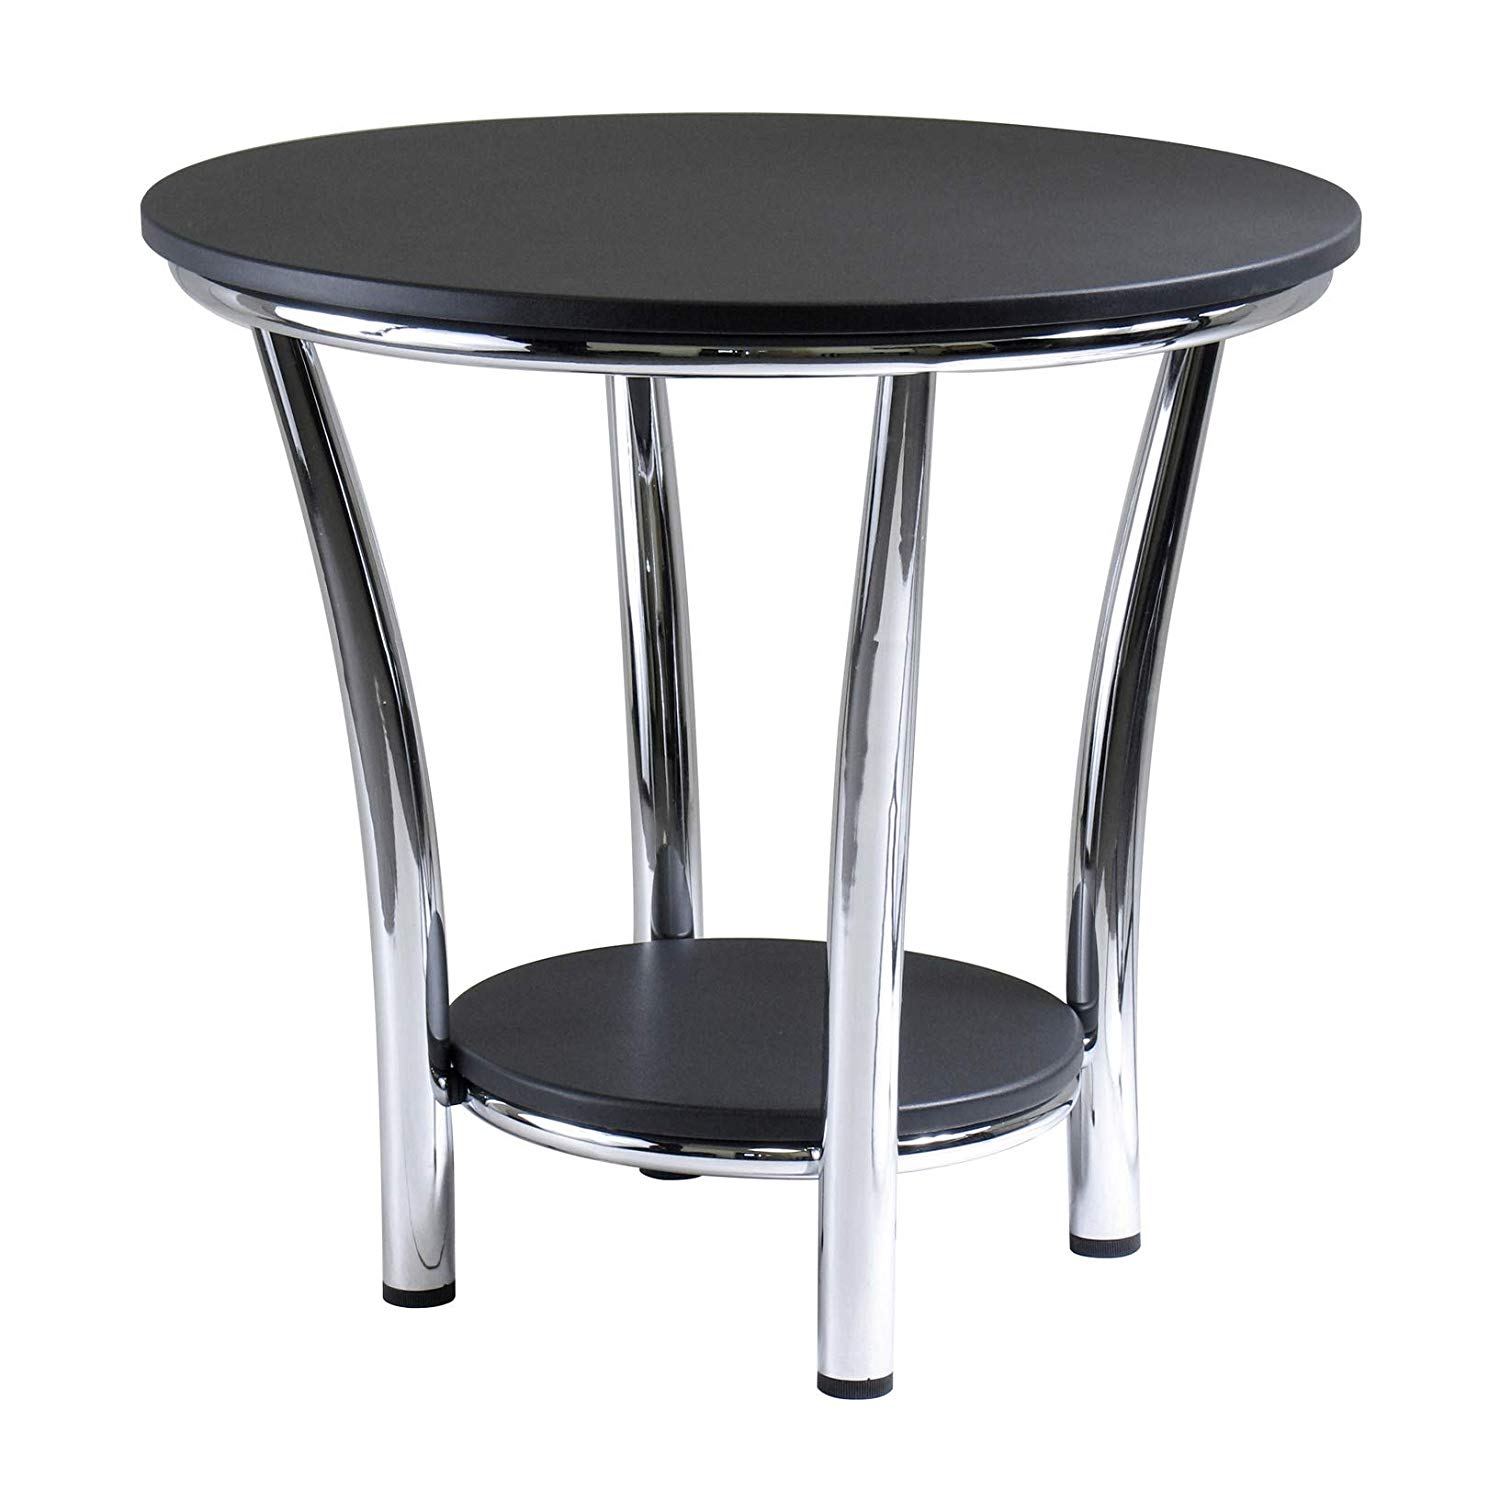 winsome wood occasional table black metal round end top legs kitchen dining pulaski counter stools small plastic patio mission furniture denver asian side cabinet laura ashley set